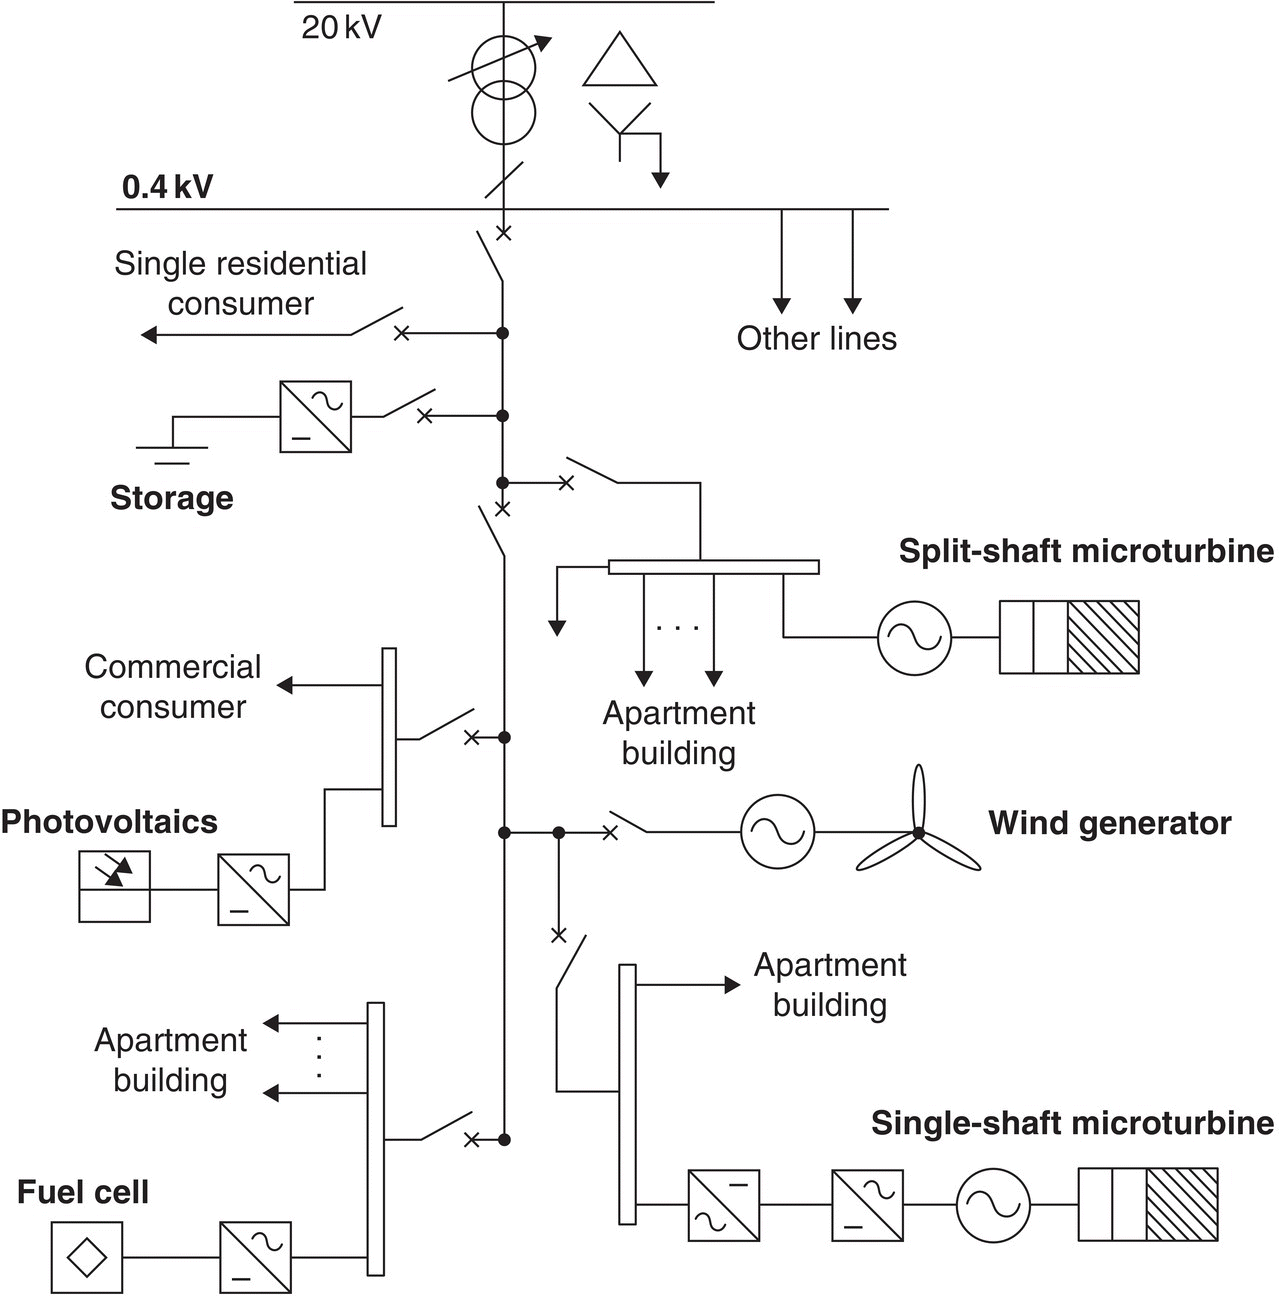 A low voltage microgrid test network with fuel cell, photovoltaics, storage, split-shaft microturbine, wind generator, single-shaft microturbine, etc. being marked.